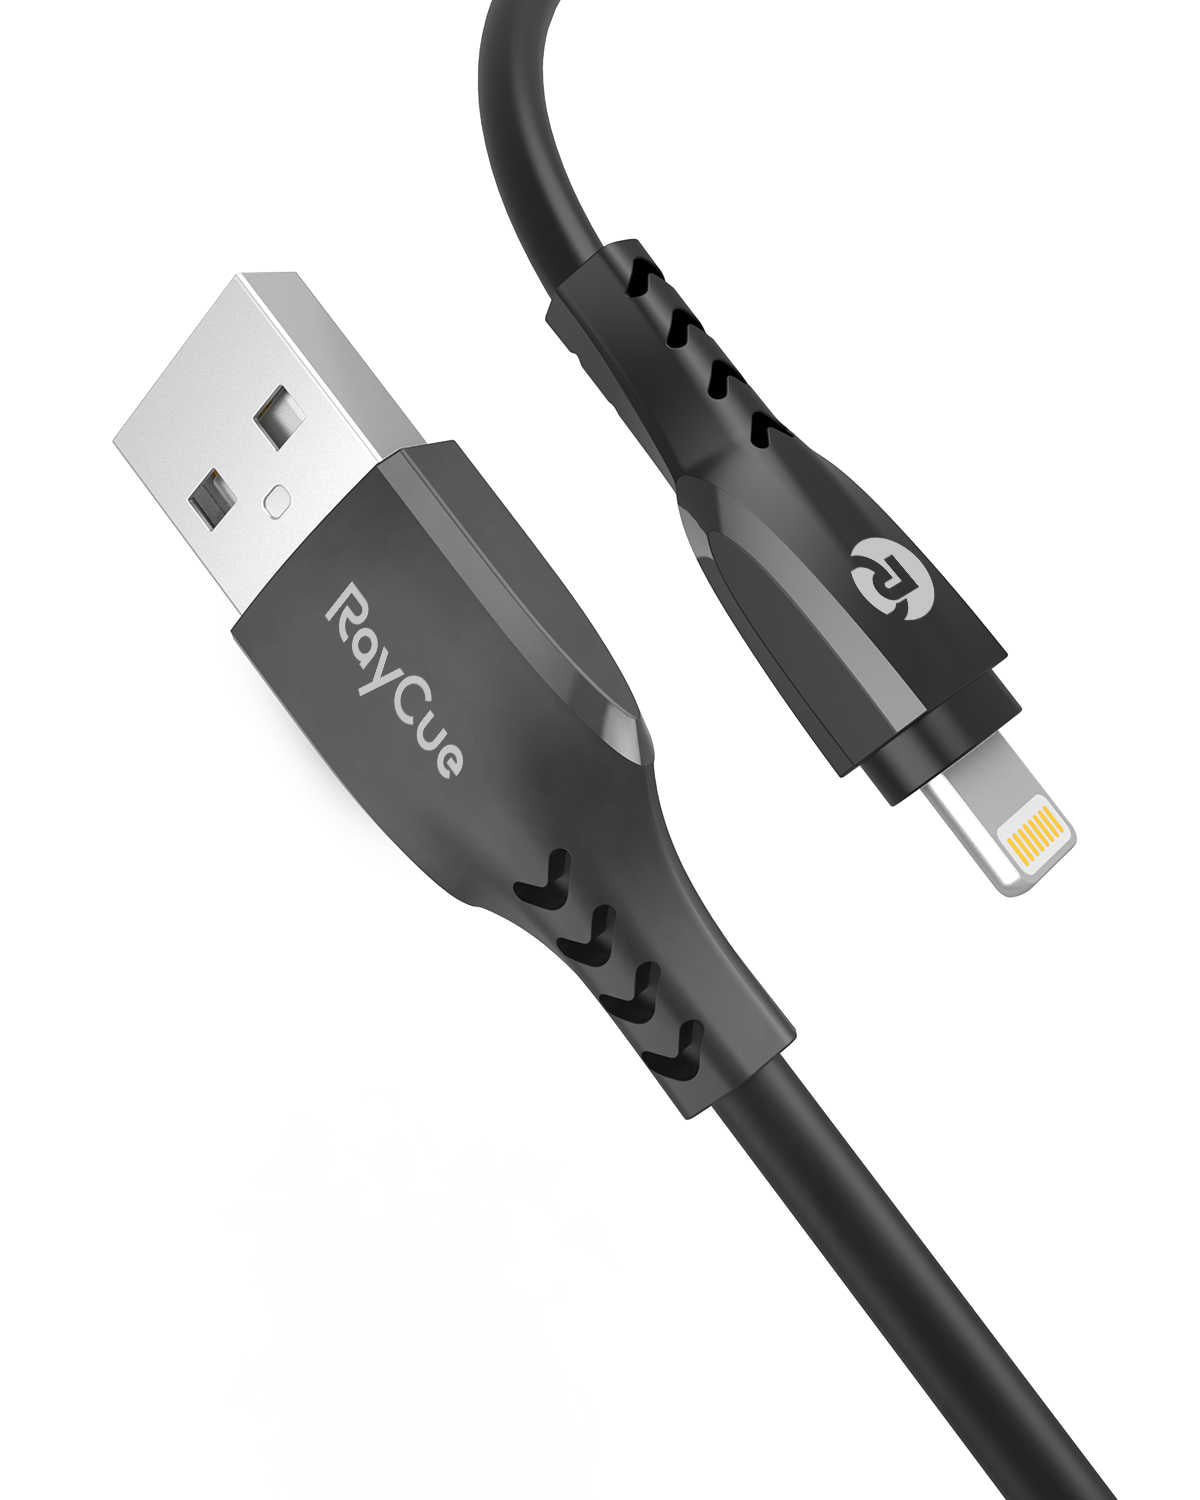 [MFI Certified] RayCue BlitzLink Flexo 1.2M PVC USB-A to Lightning Cable for iPhone iPad